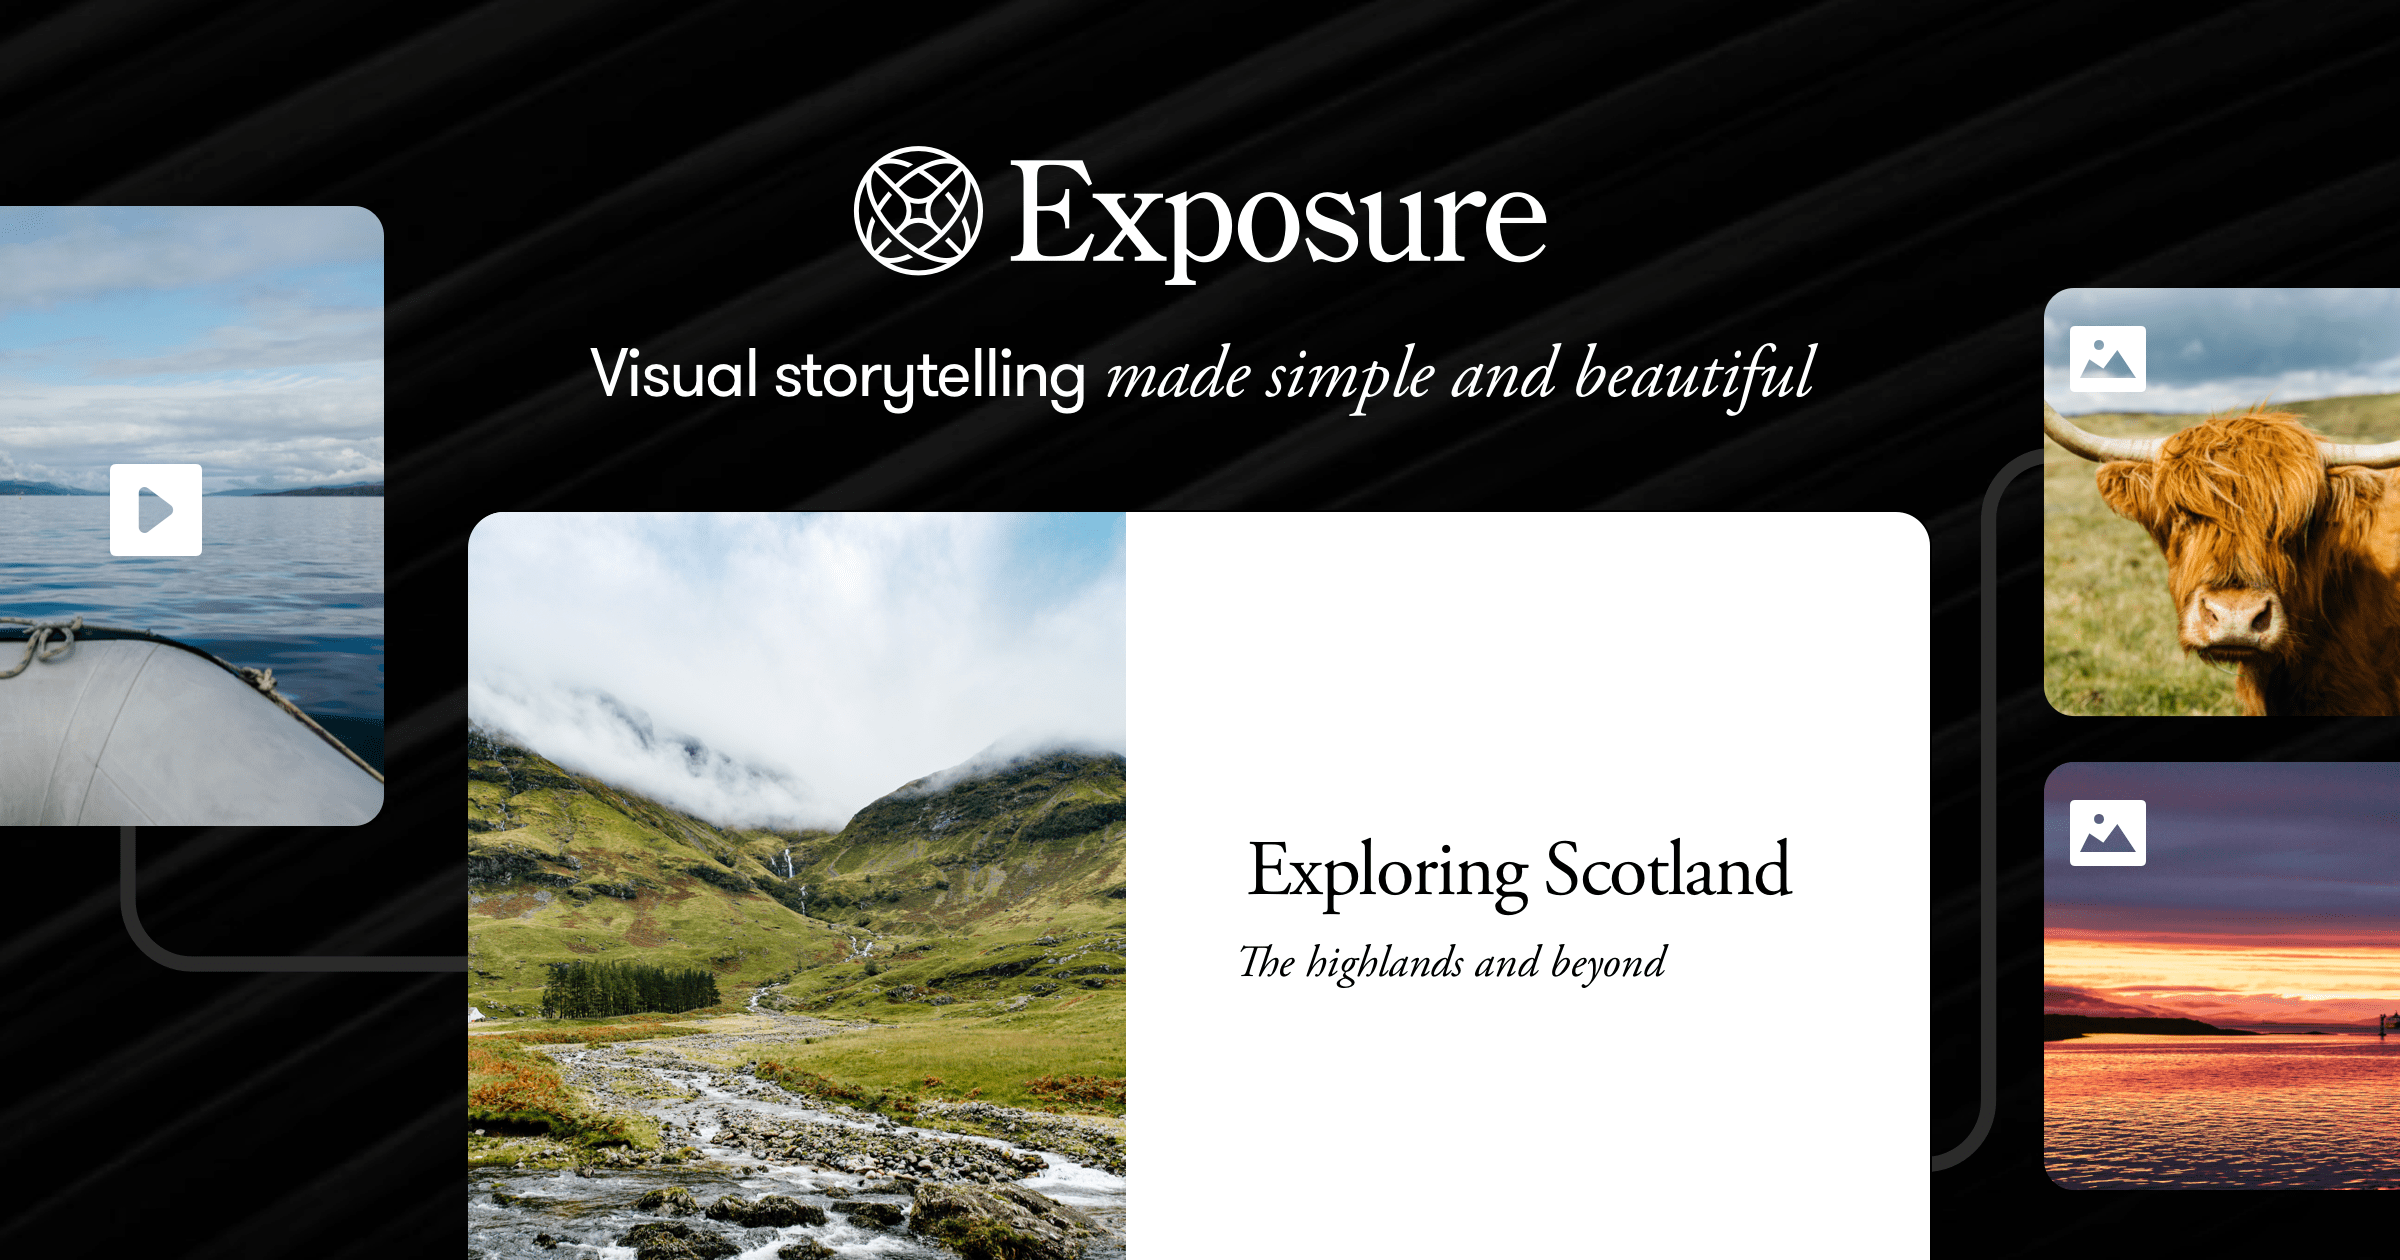 The visual storytelling platform made simple and beautiful